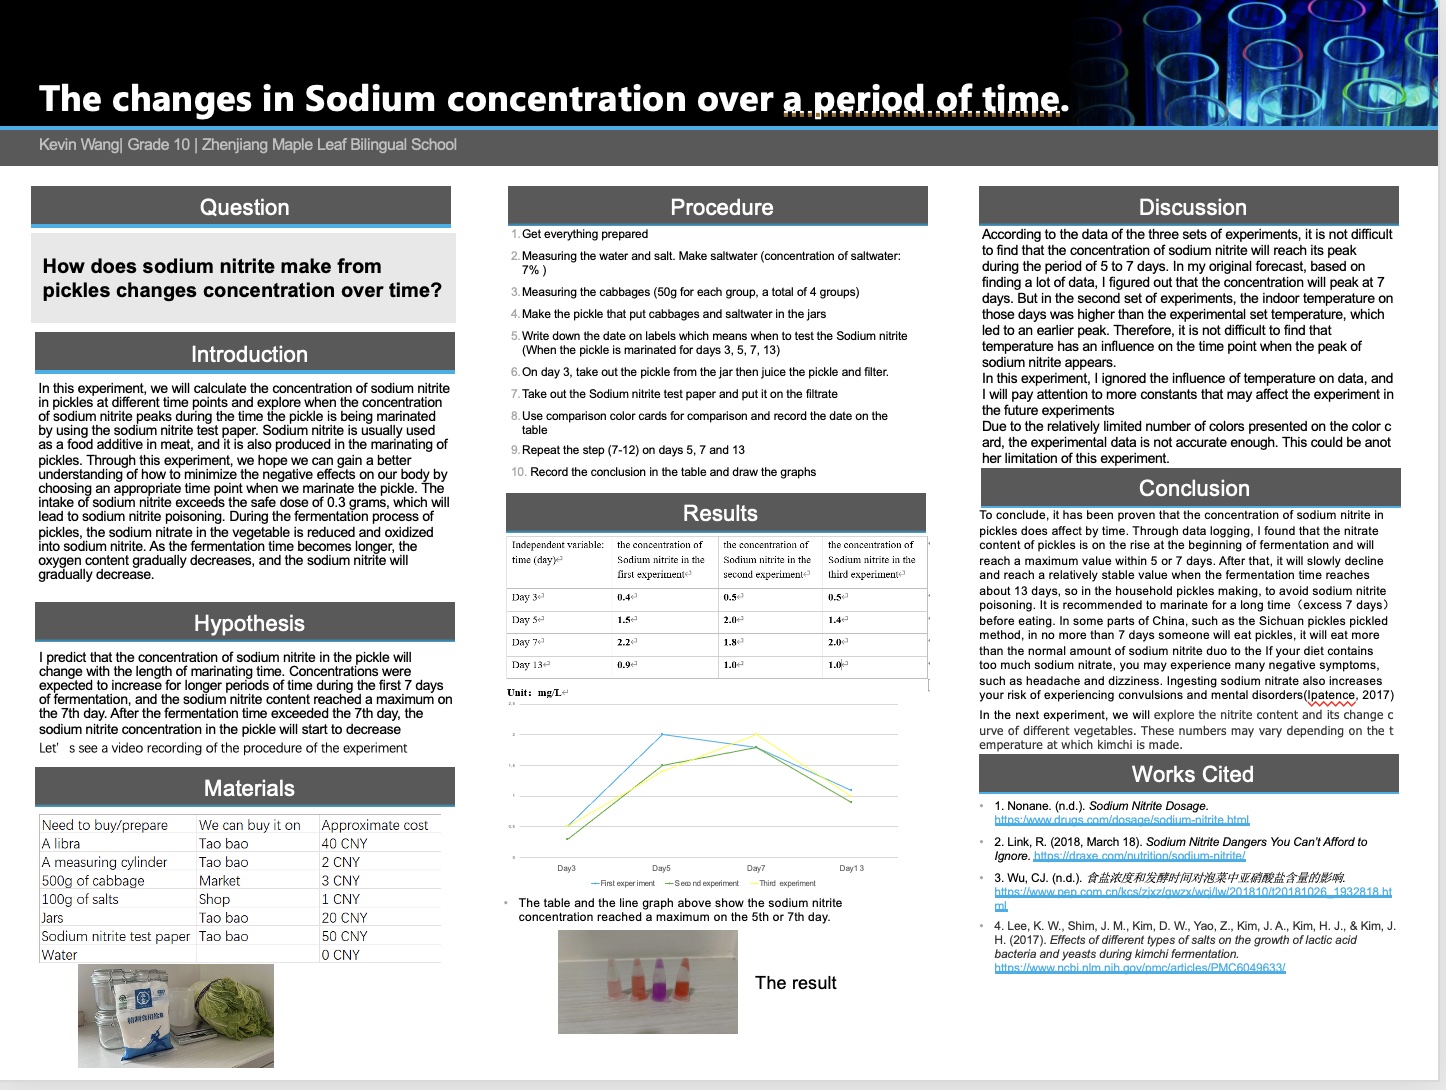 The Changes in Sodium Concentration over a Period of Time